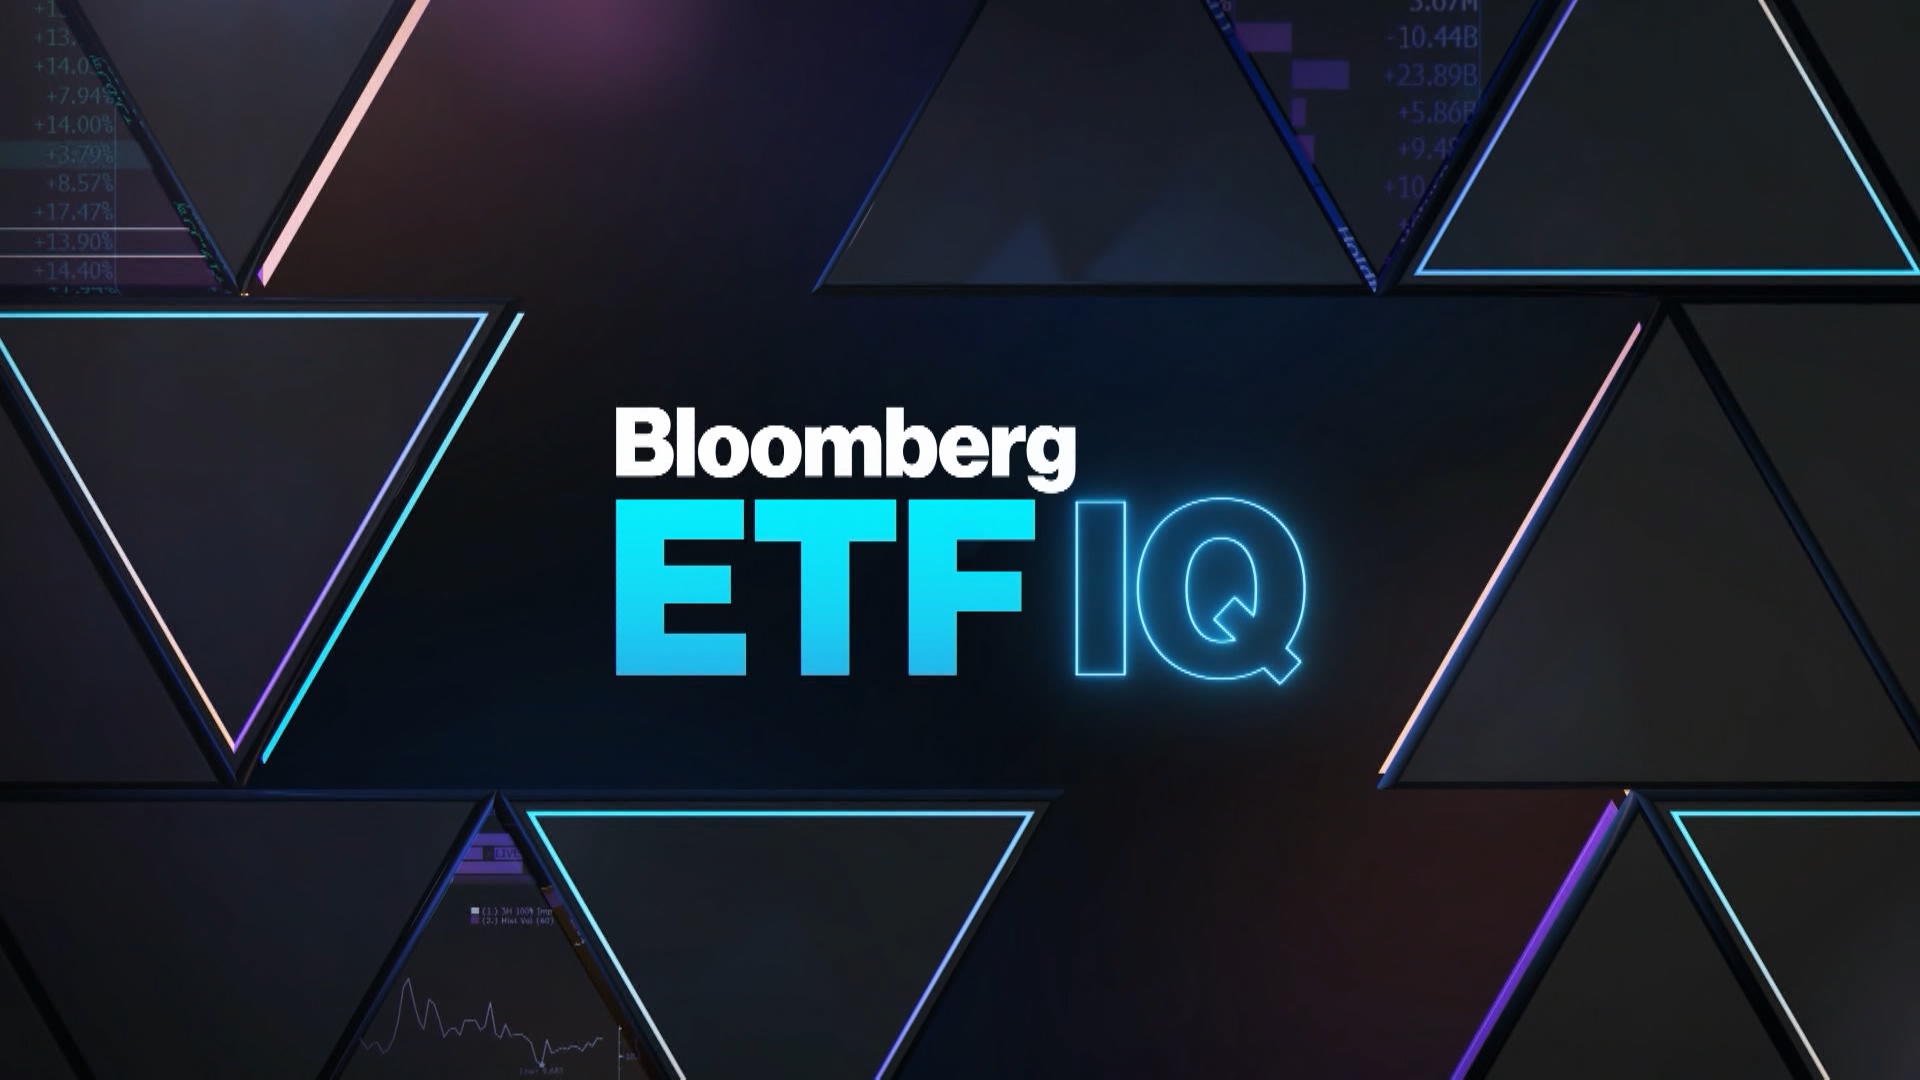 Bloomberg Etf Iq Full Show 09 25 2019 Bloomberg Images, Photos, Reviews